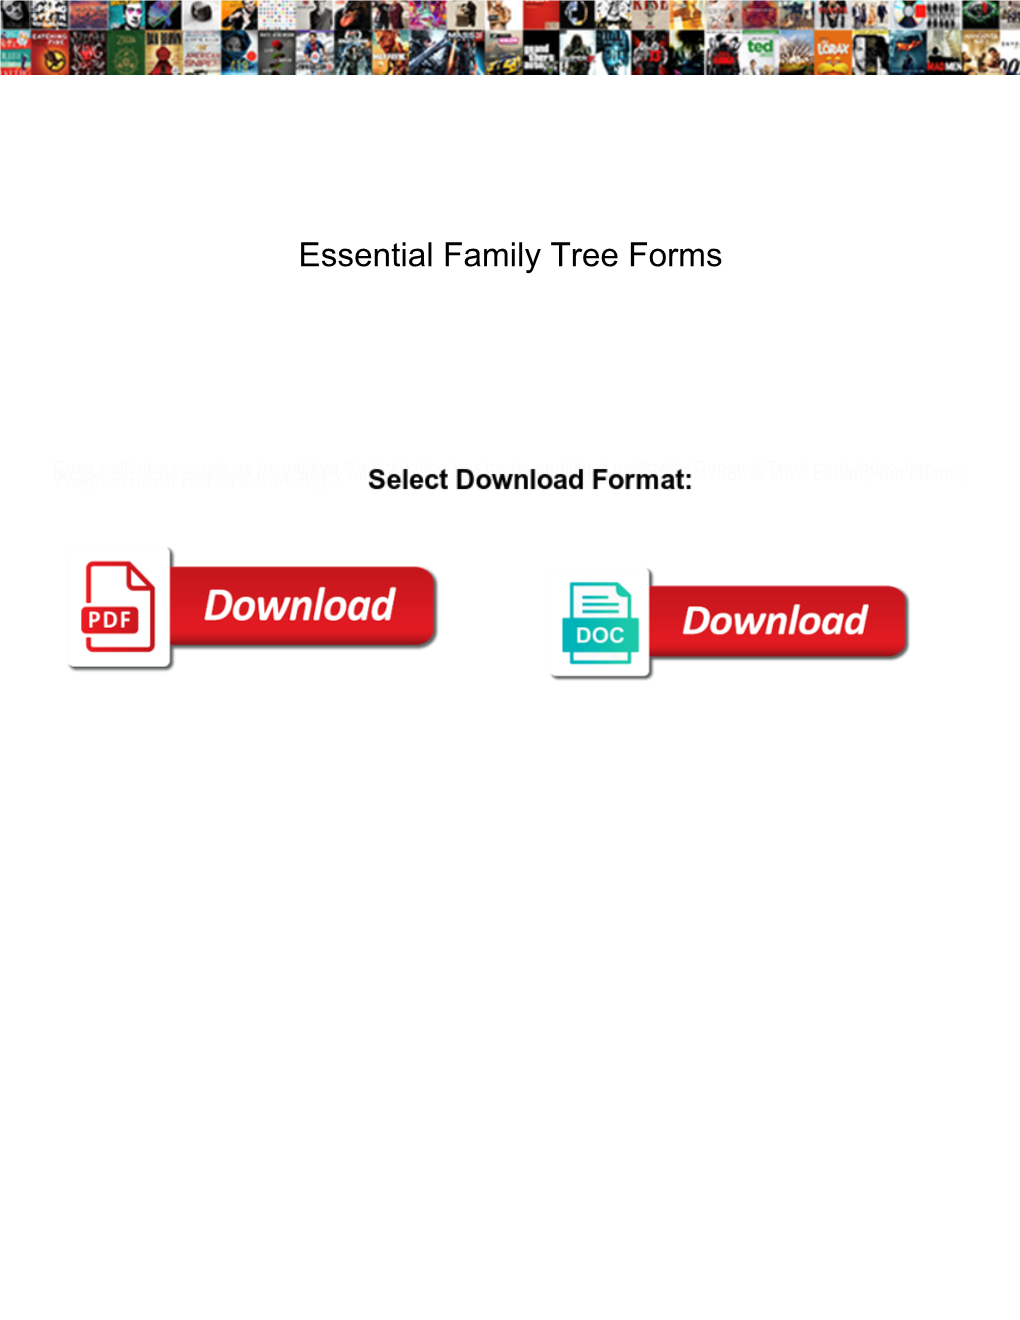 Essential Family Tree Forms